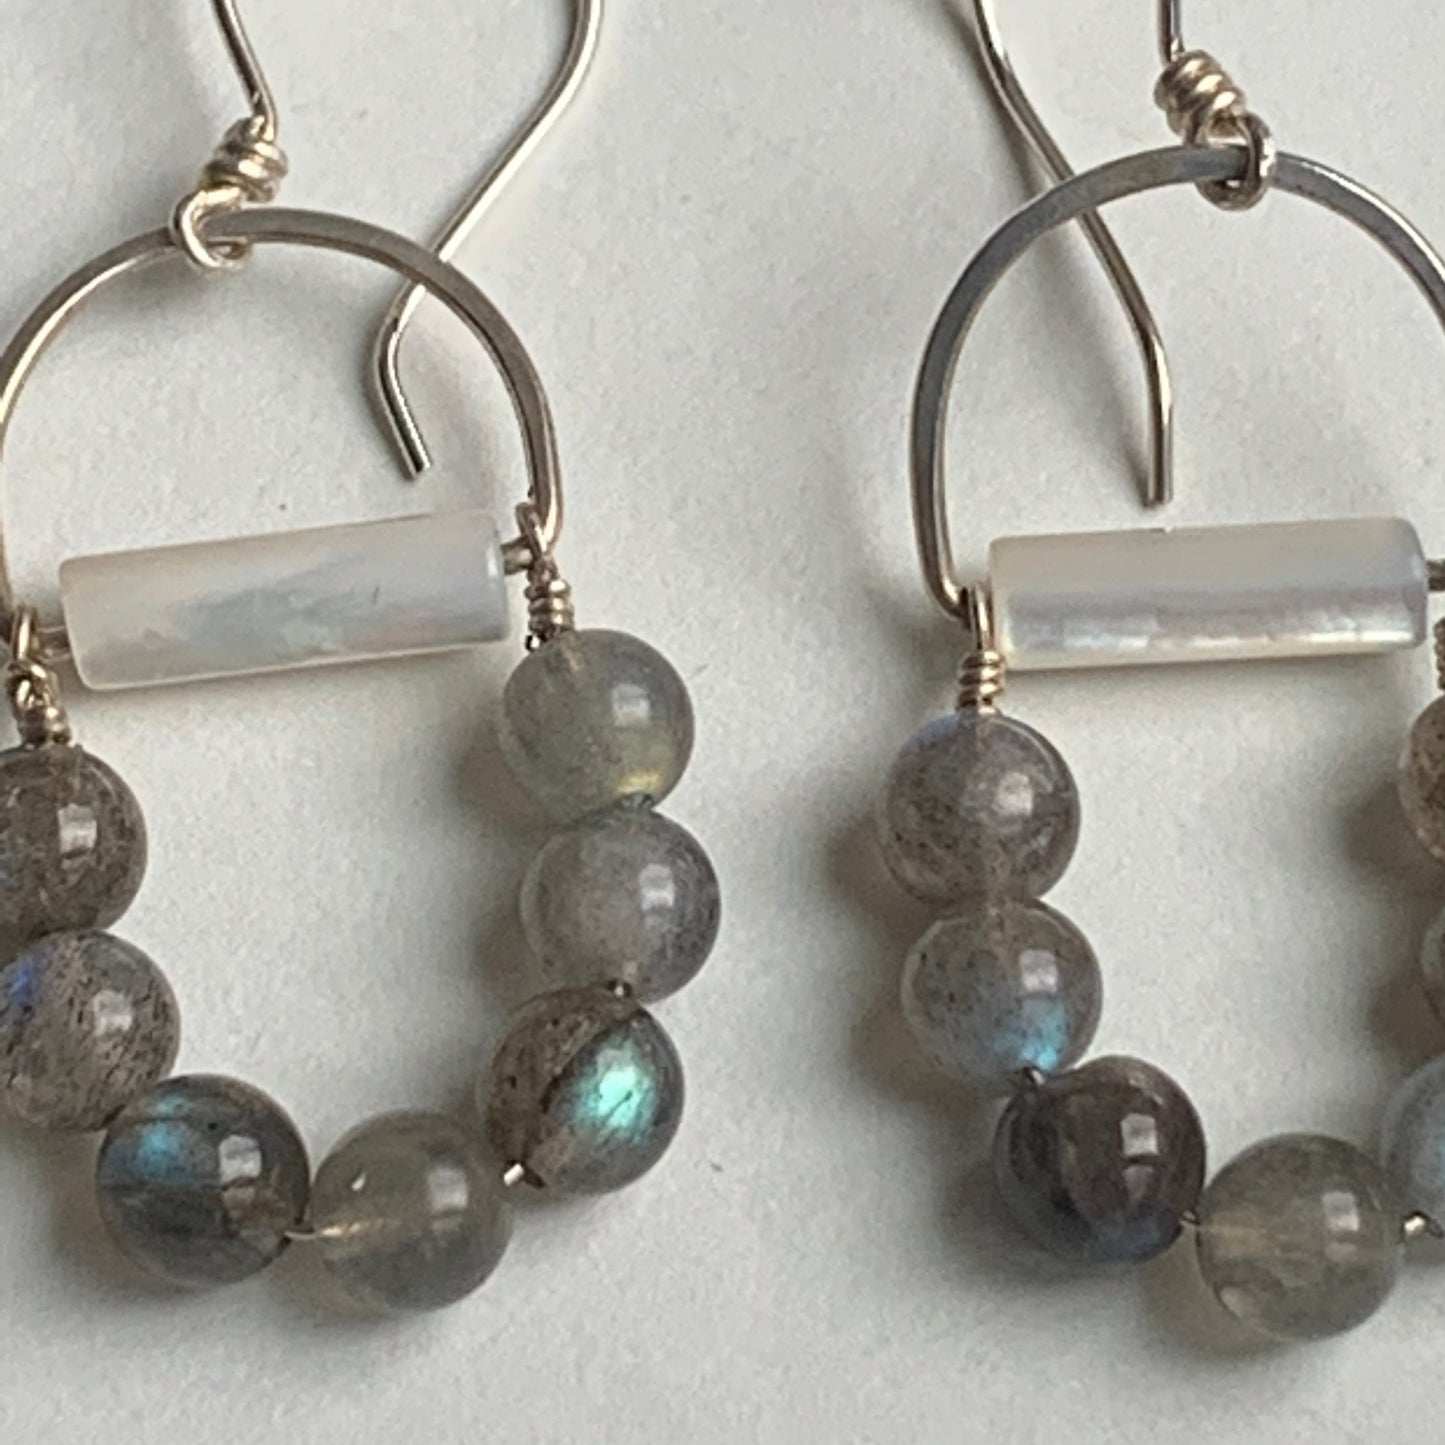 Beaded earrings - labradorite and mother of pearl - handmade jewelry for women, original boho style - earthy - sterling and gemstone - yoga